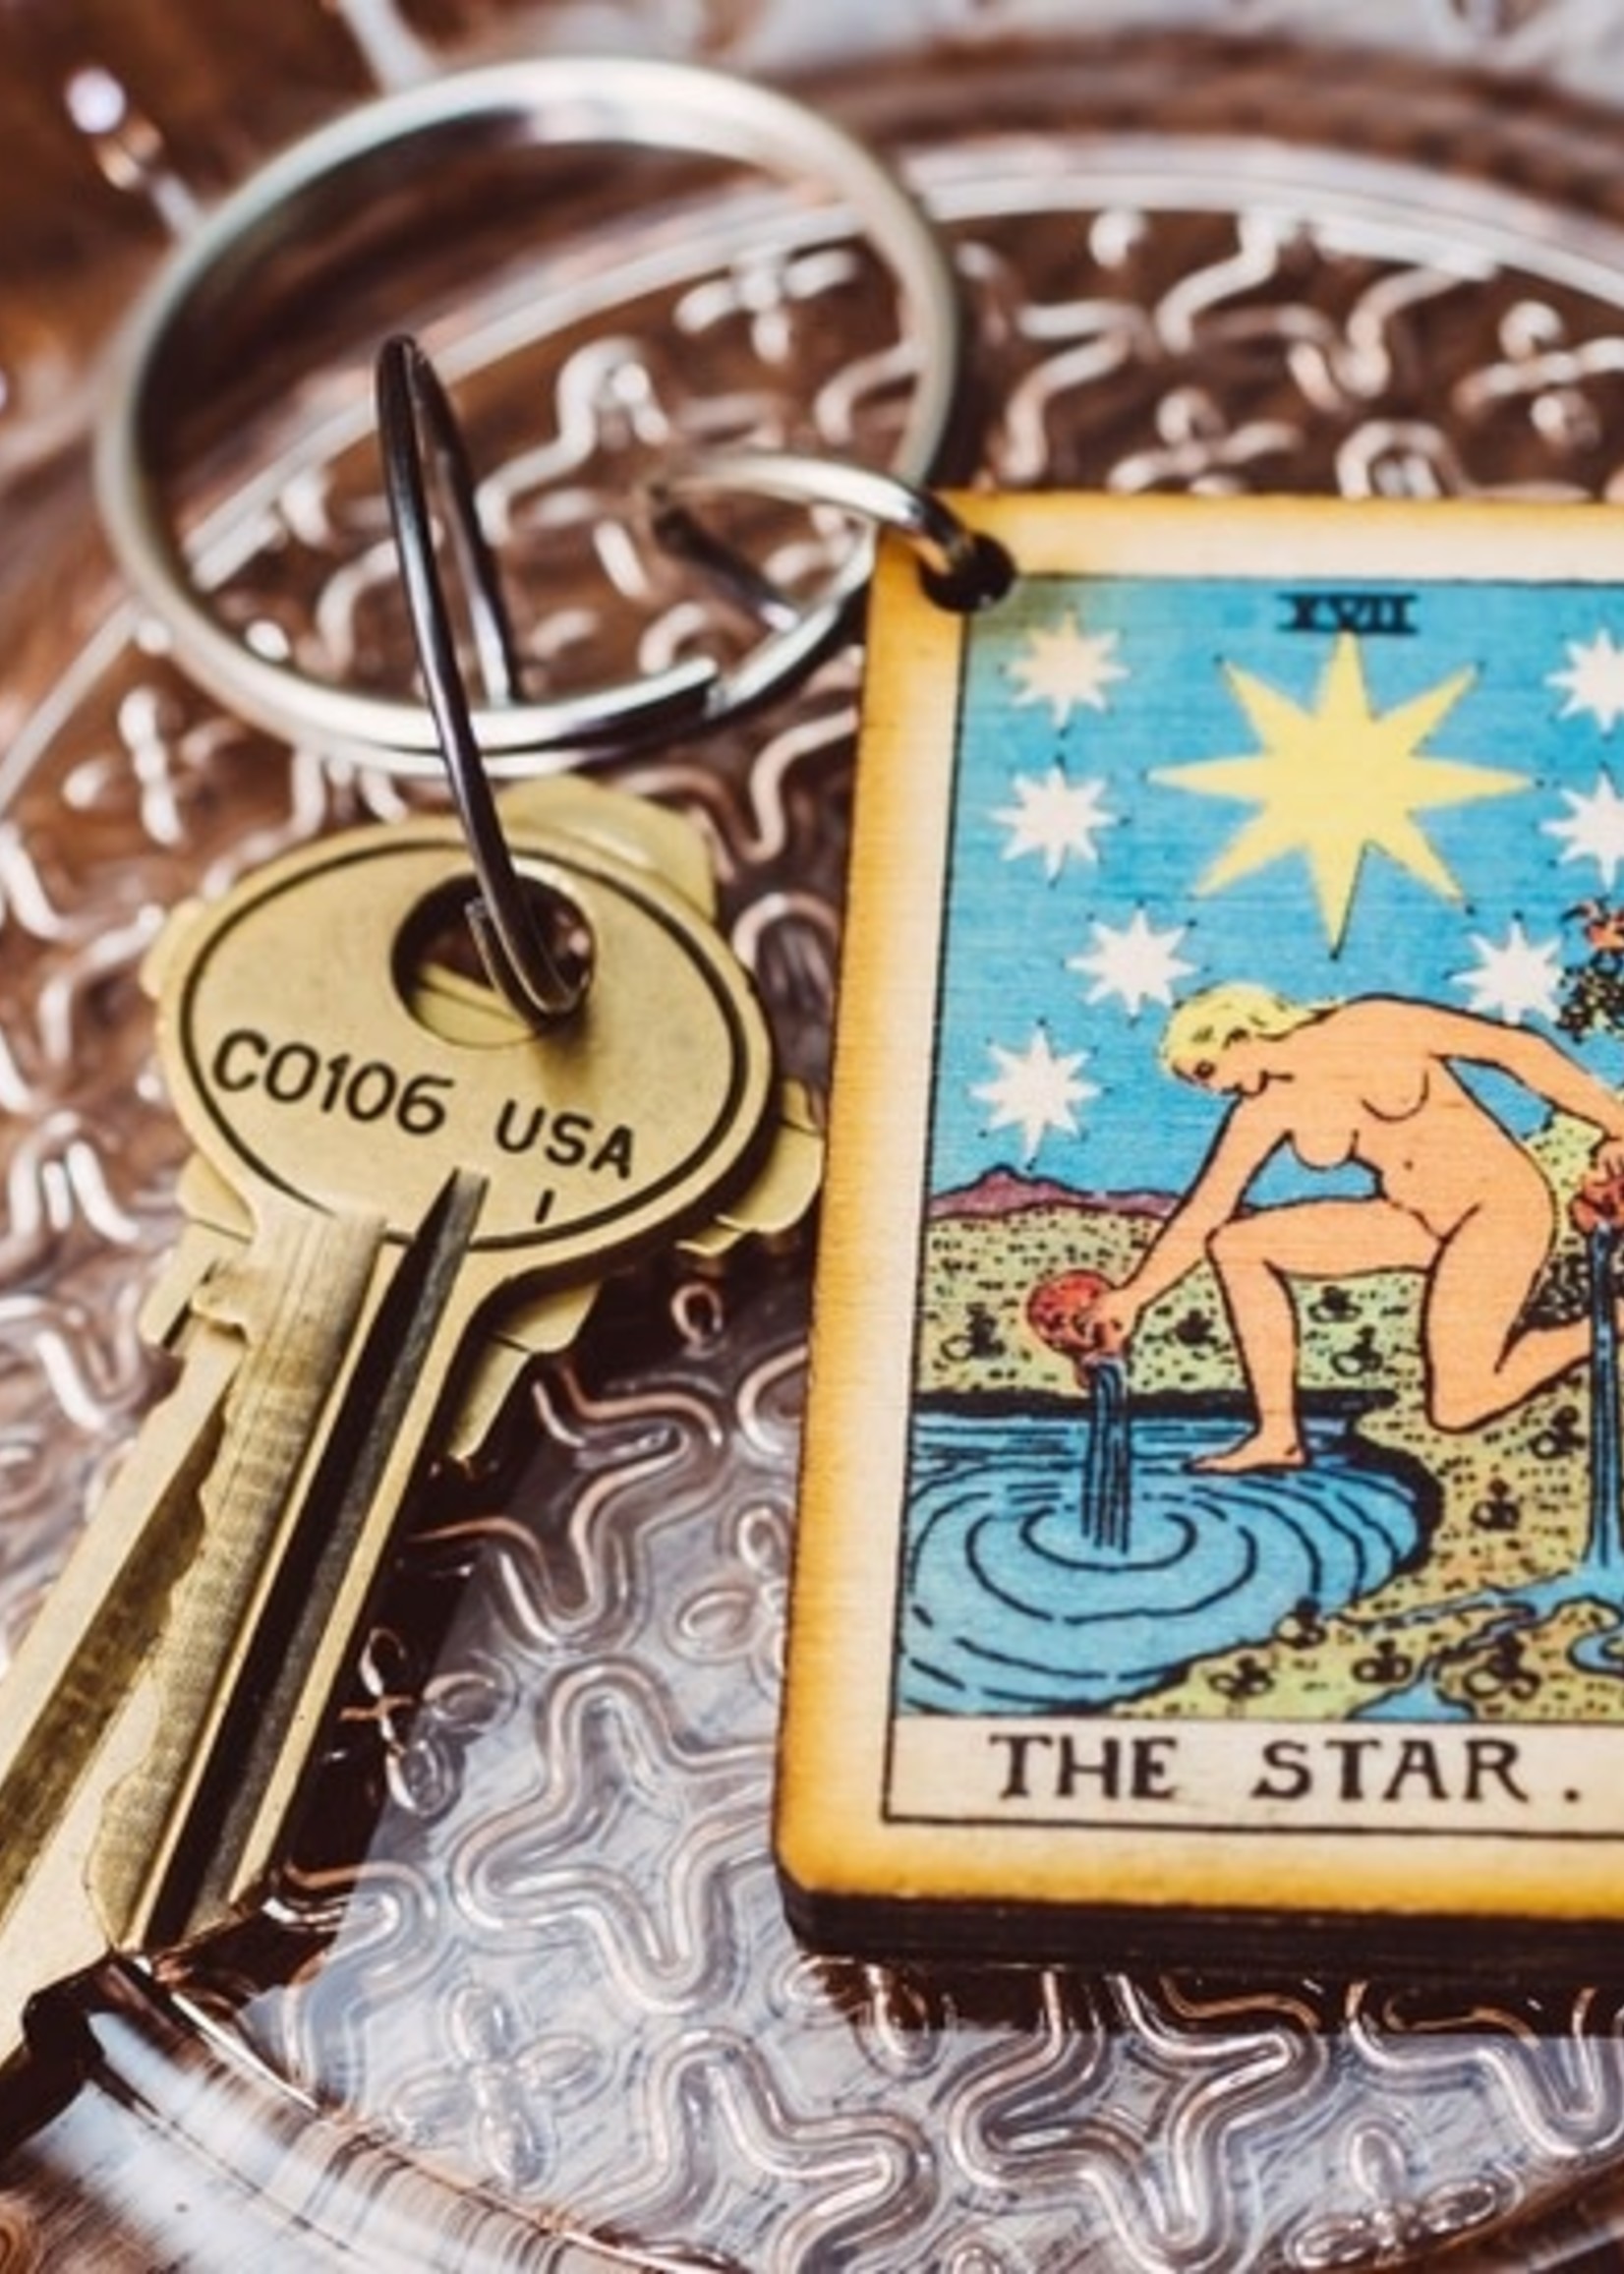 Most Amazing Tarot - 17 - The Star Wooden Keychain